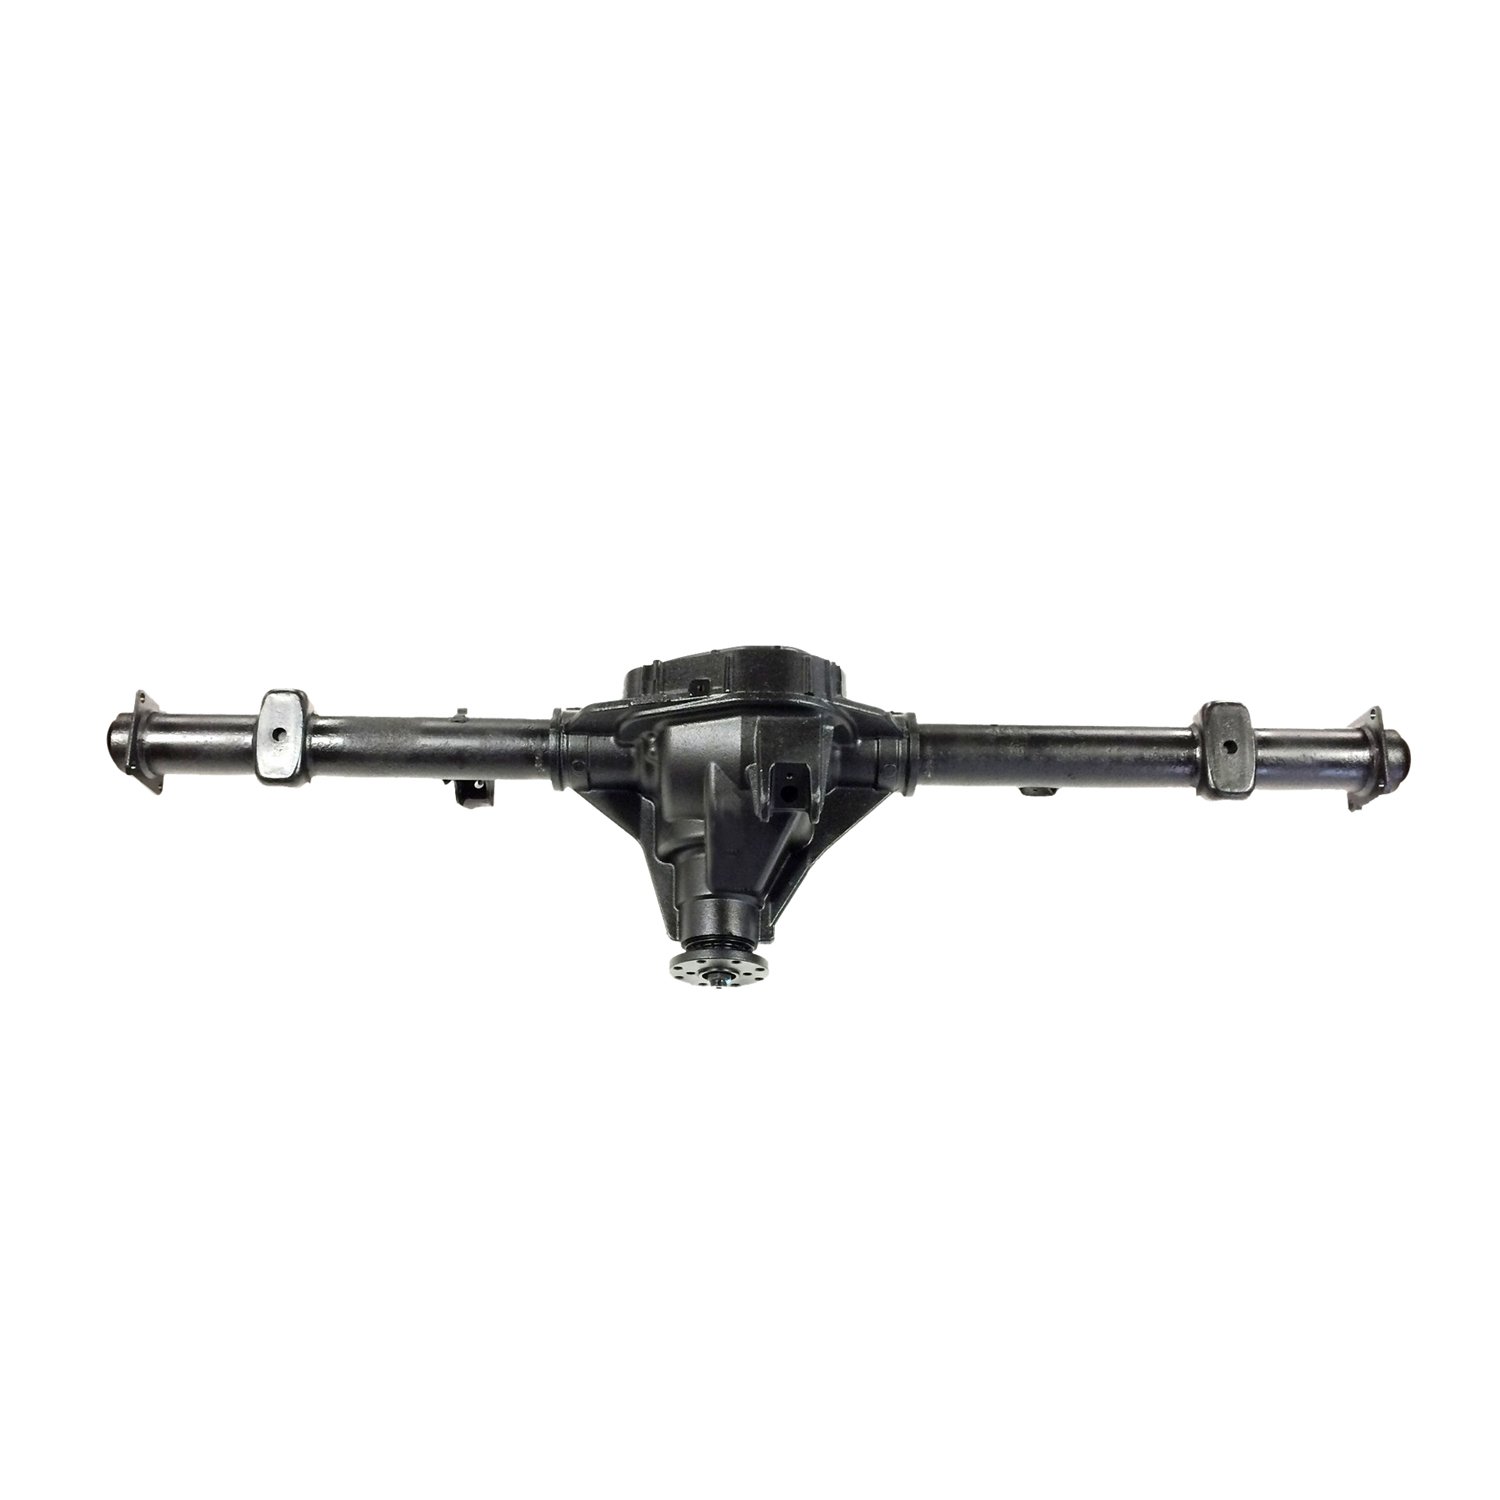 Remanufactured Complete Axle Assembly for Ford 9.75" 04-06 Ford E150 3.73 Ratio, Posi LSD